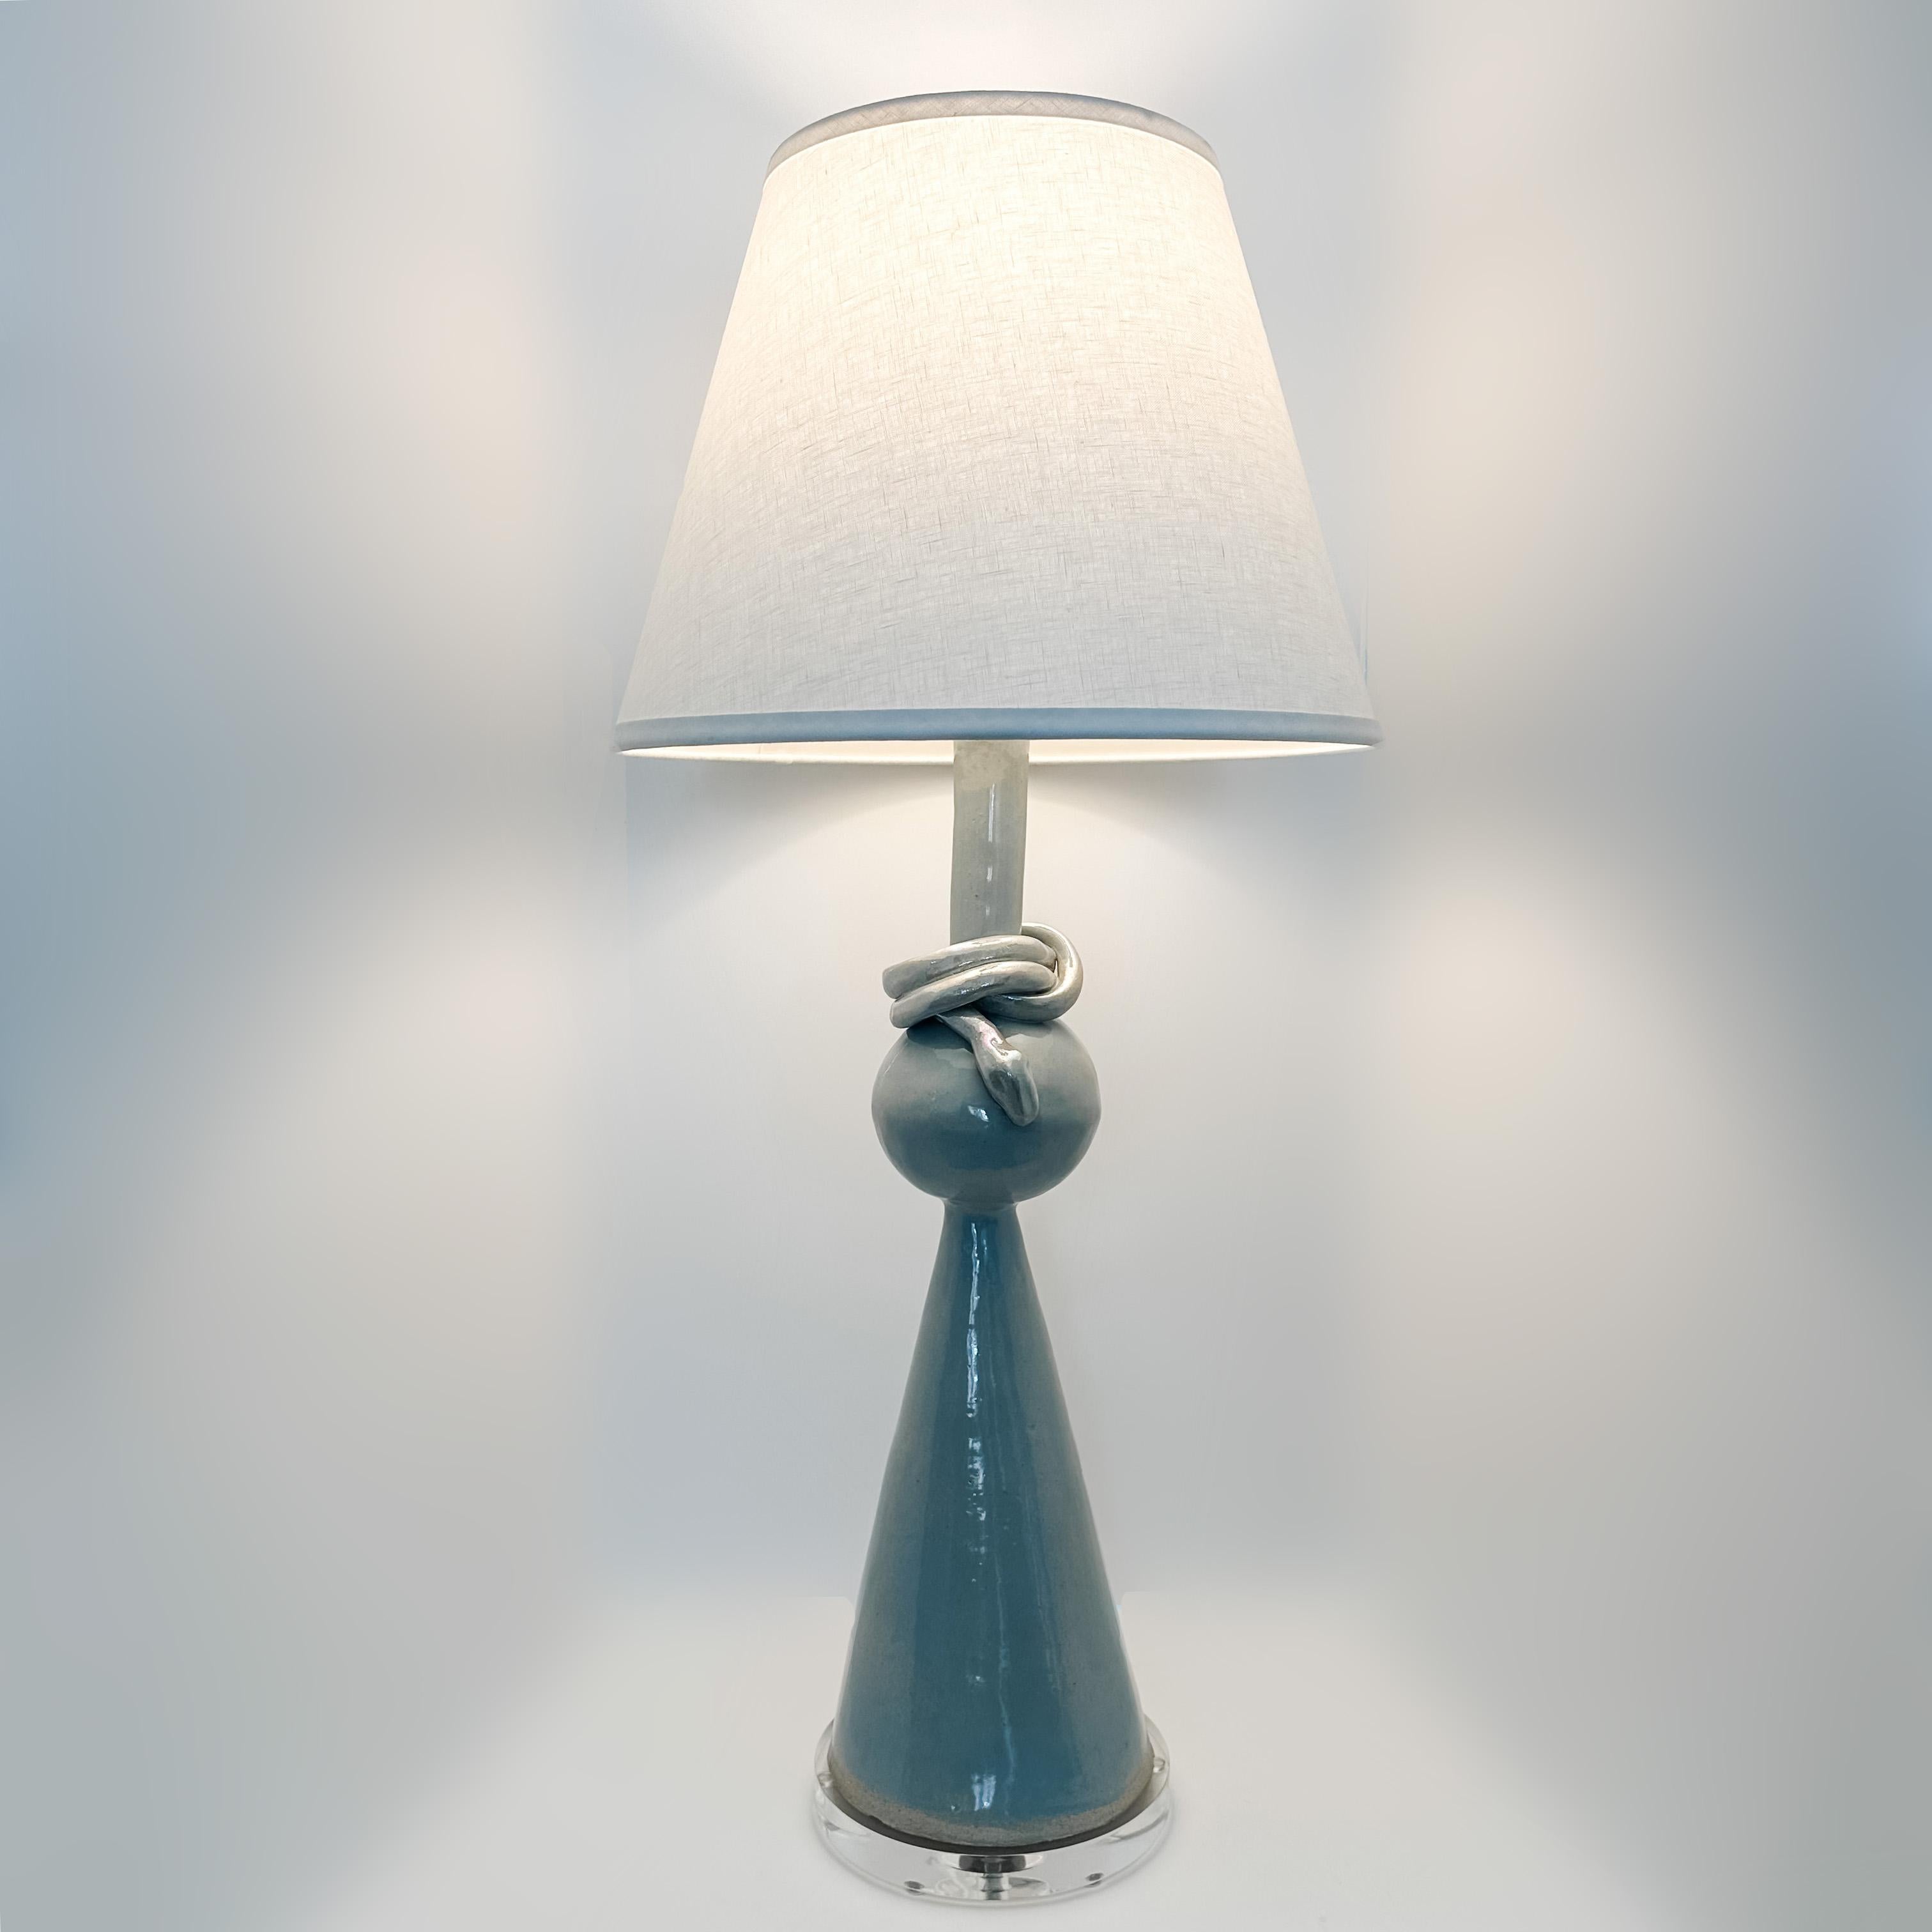 The Geo table lamp is handmade in raku clay in a Wedgwood glaze with silver components, braided silver fabric cord, and an ivory linen shade. Simple forms and clean design define the Geo Table Lamp. This understated design will complement any